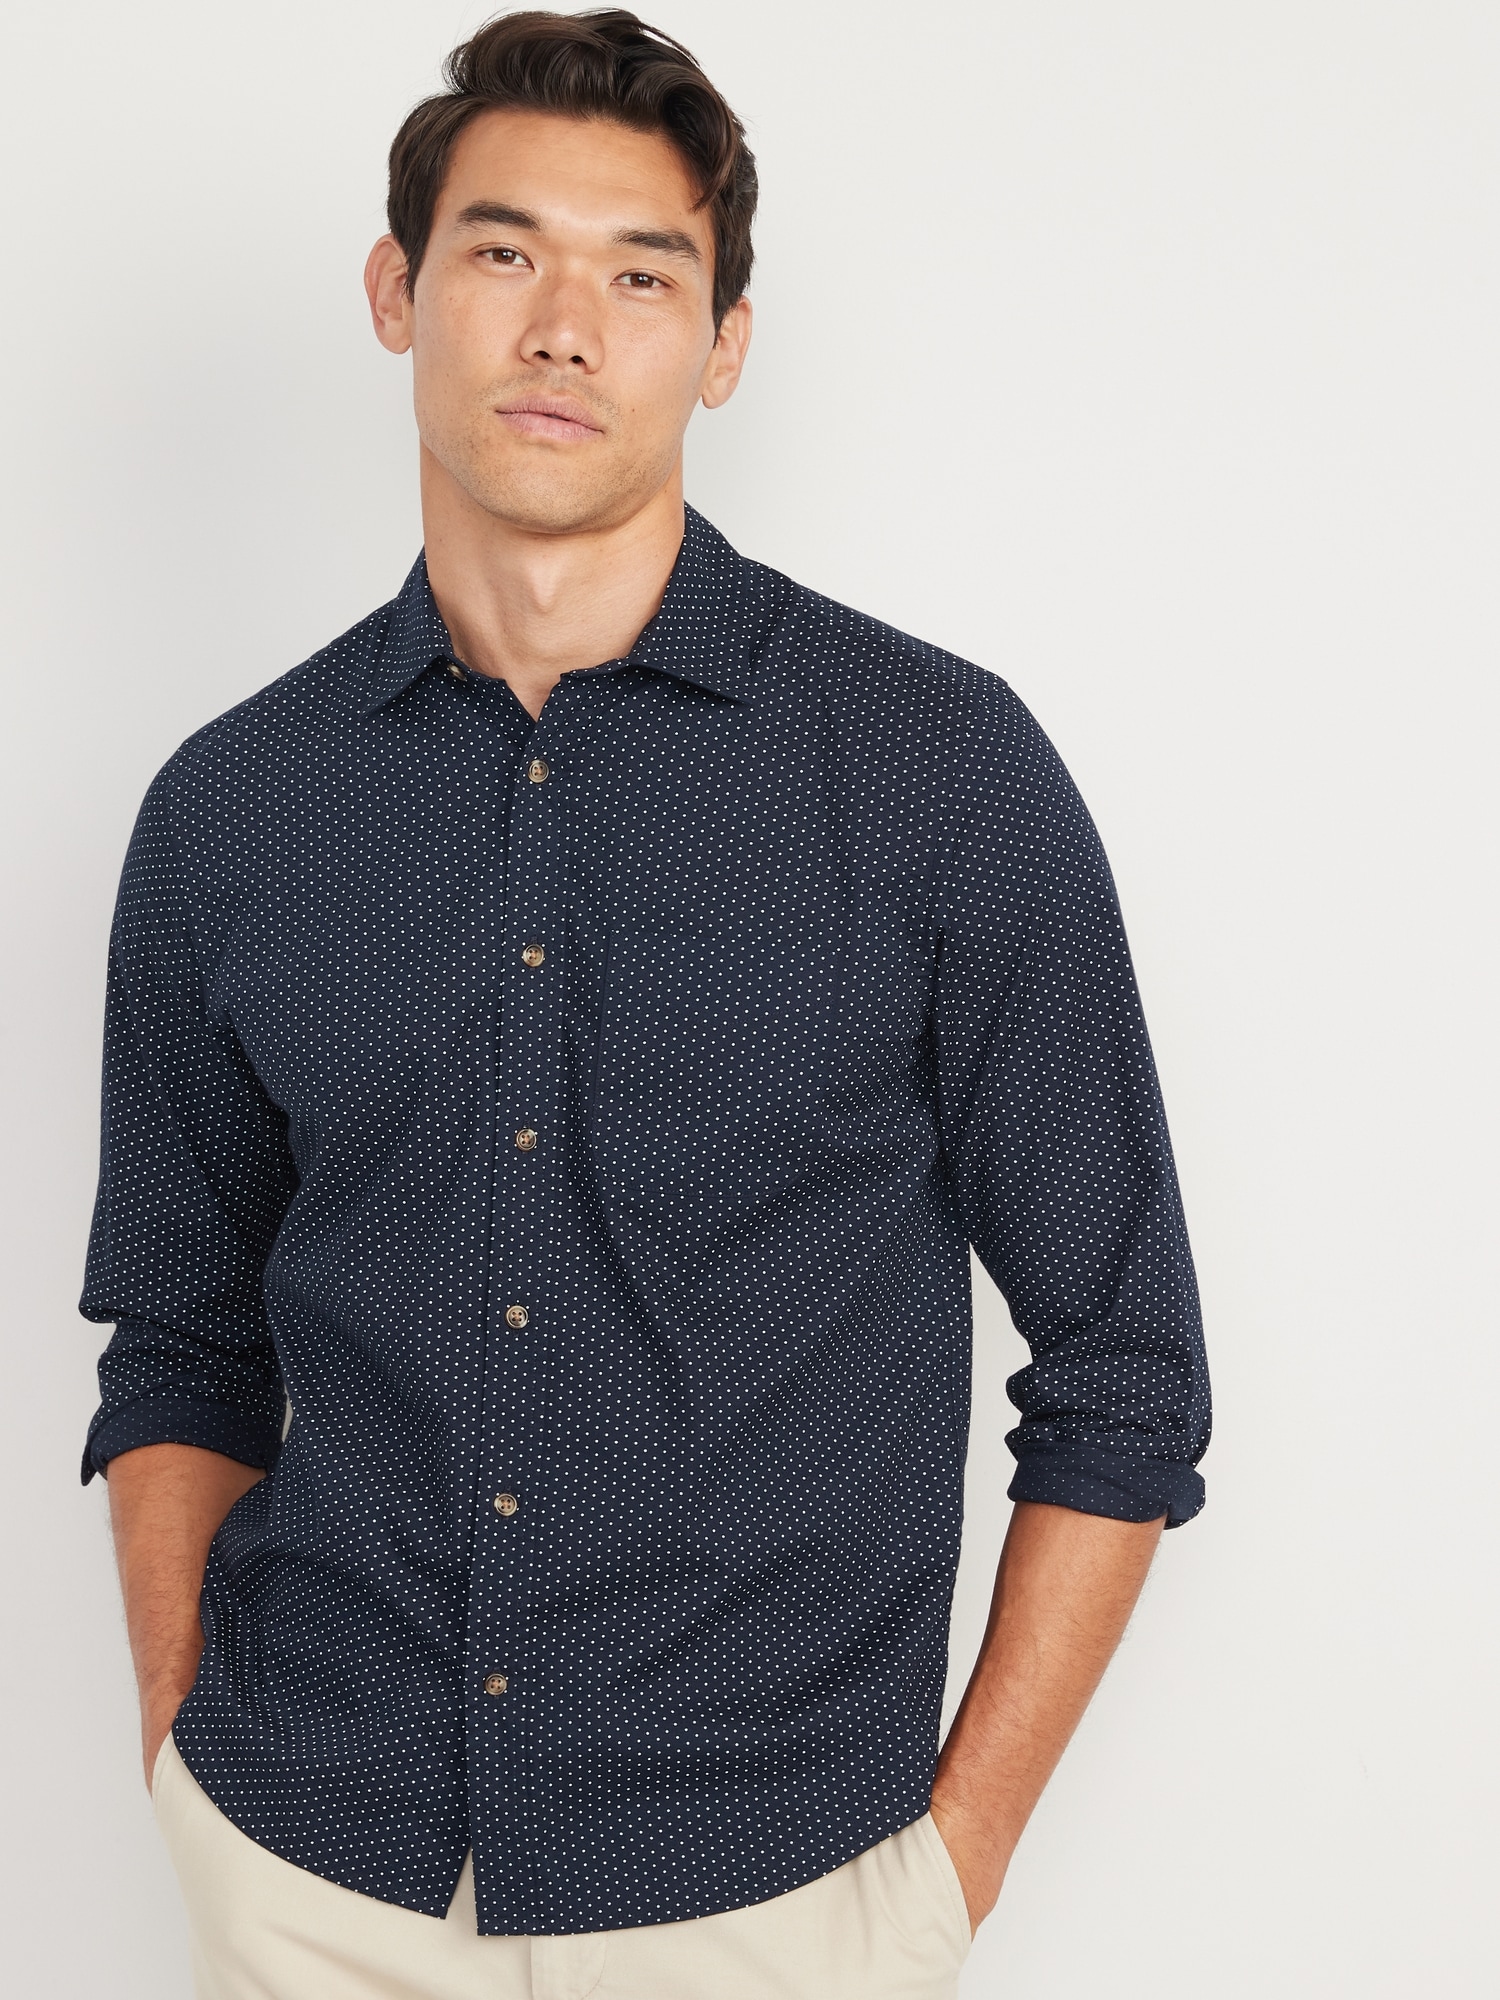 Old Navy Men's Classic-Fit Everyday Shirt